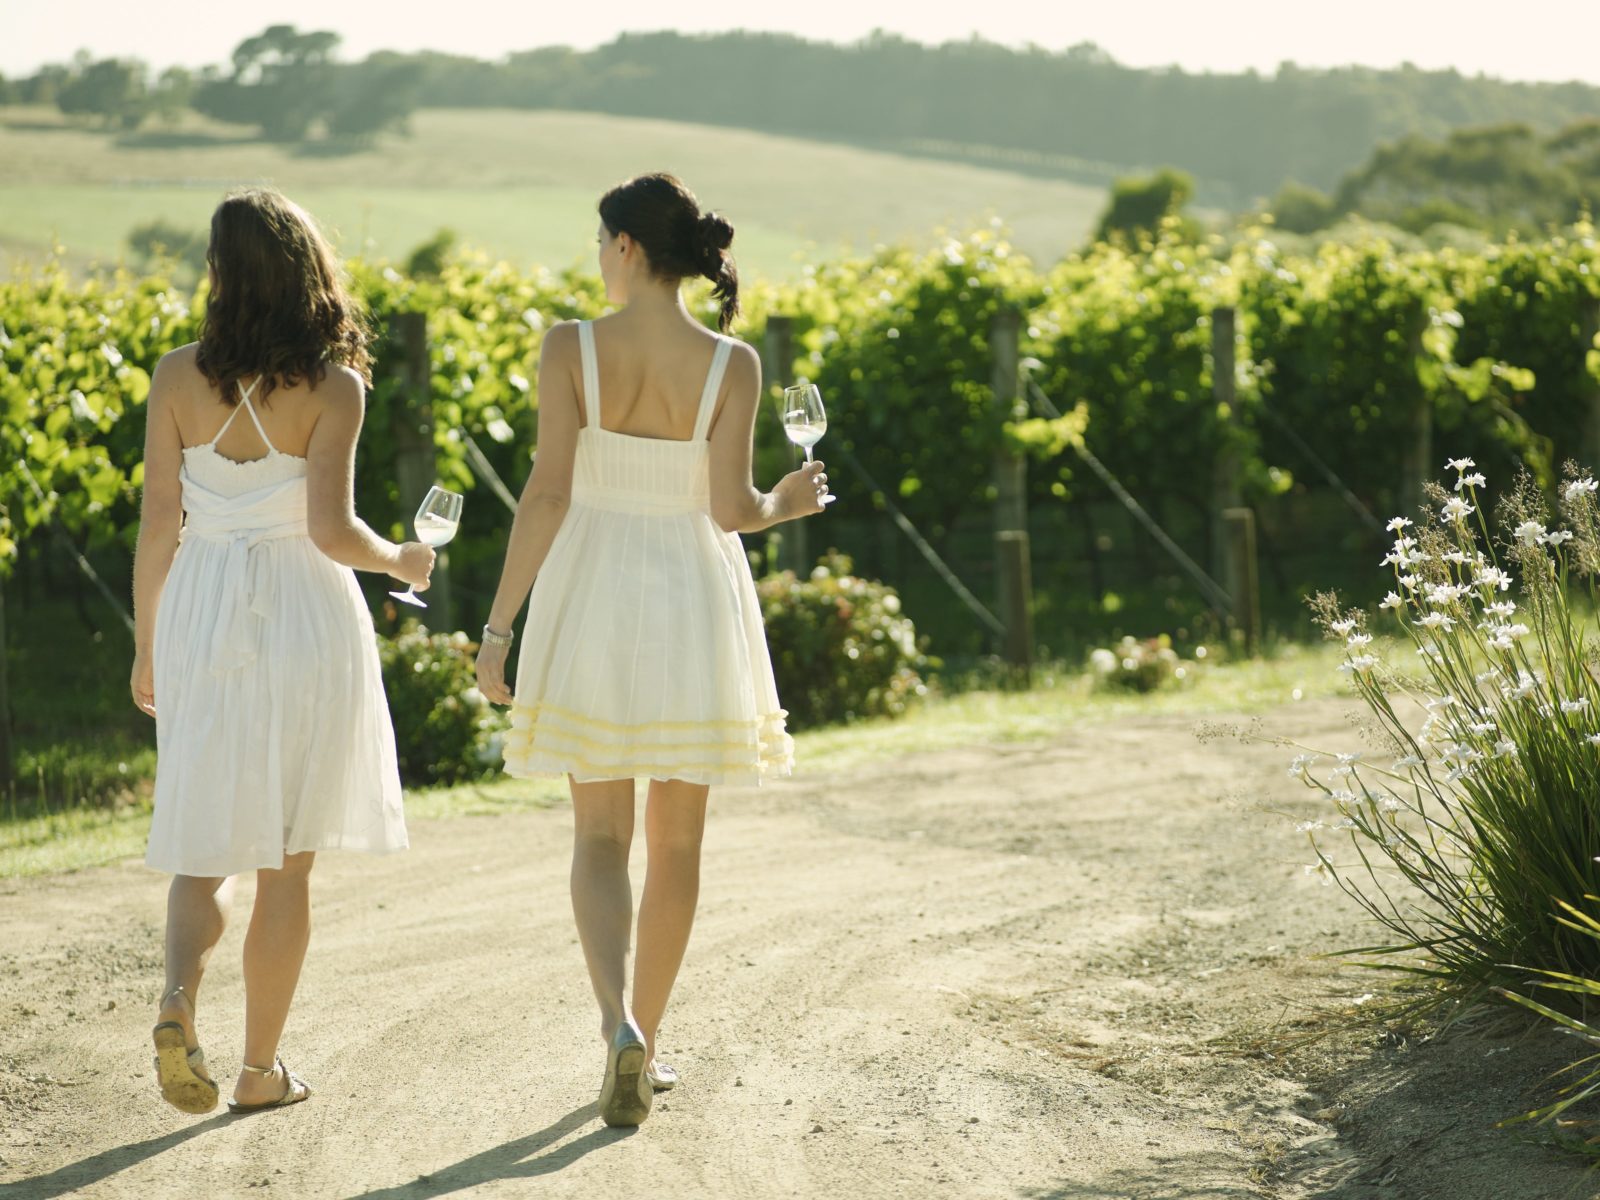 Winery tours Melbourne